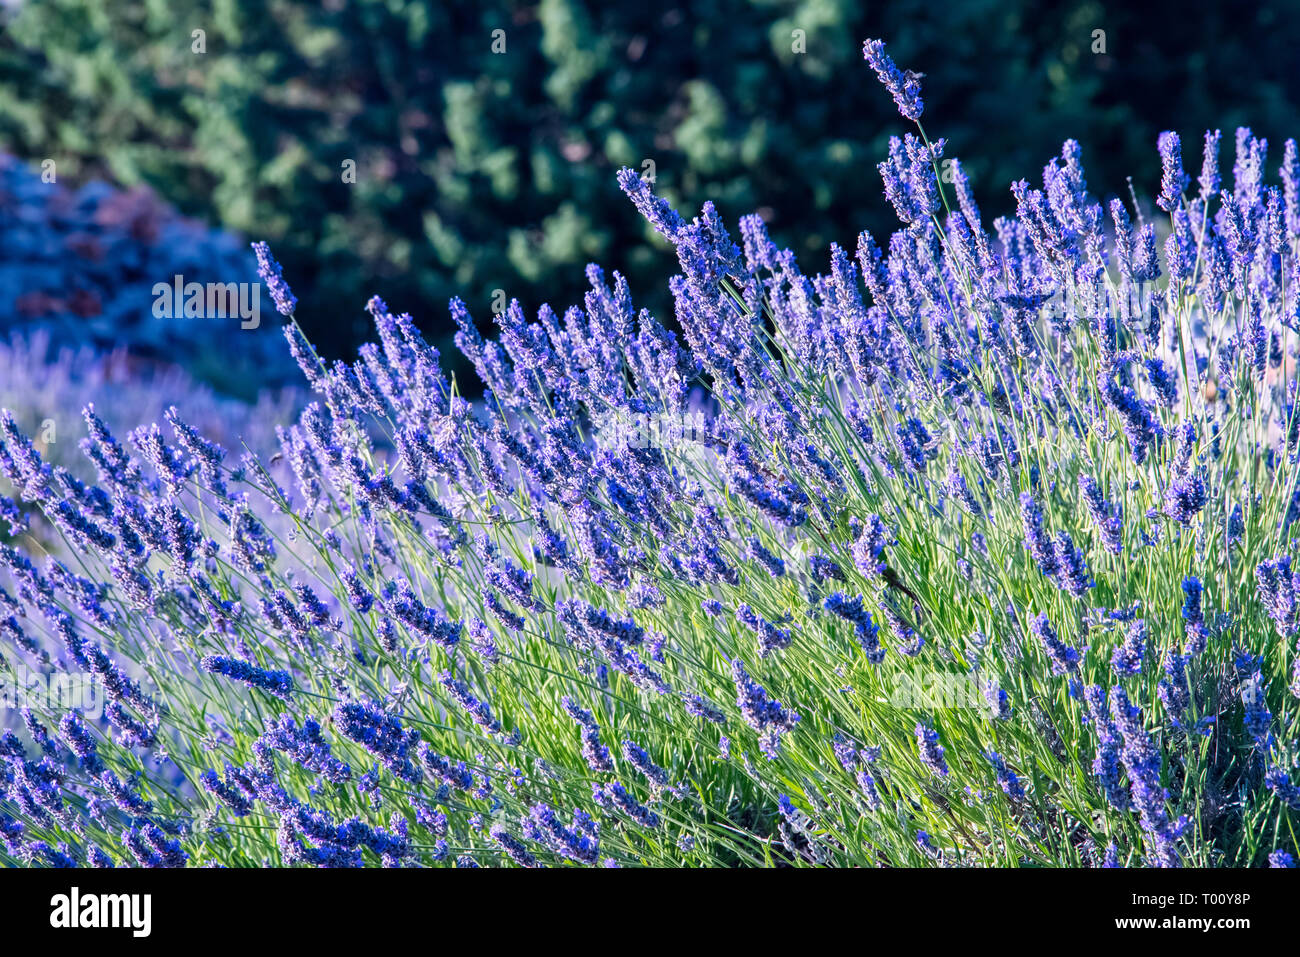 CROATIA, Hvar island - June 2018: Hvari is world famous for its lavender, which is of the highest quality in the world. Due to its unique climate and  Stock Photo